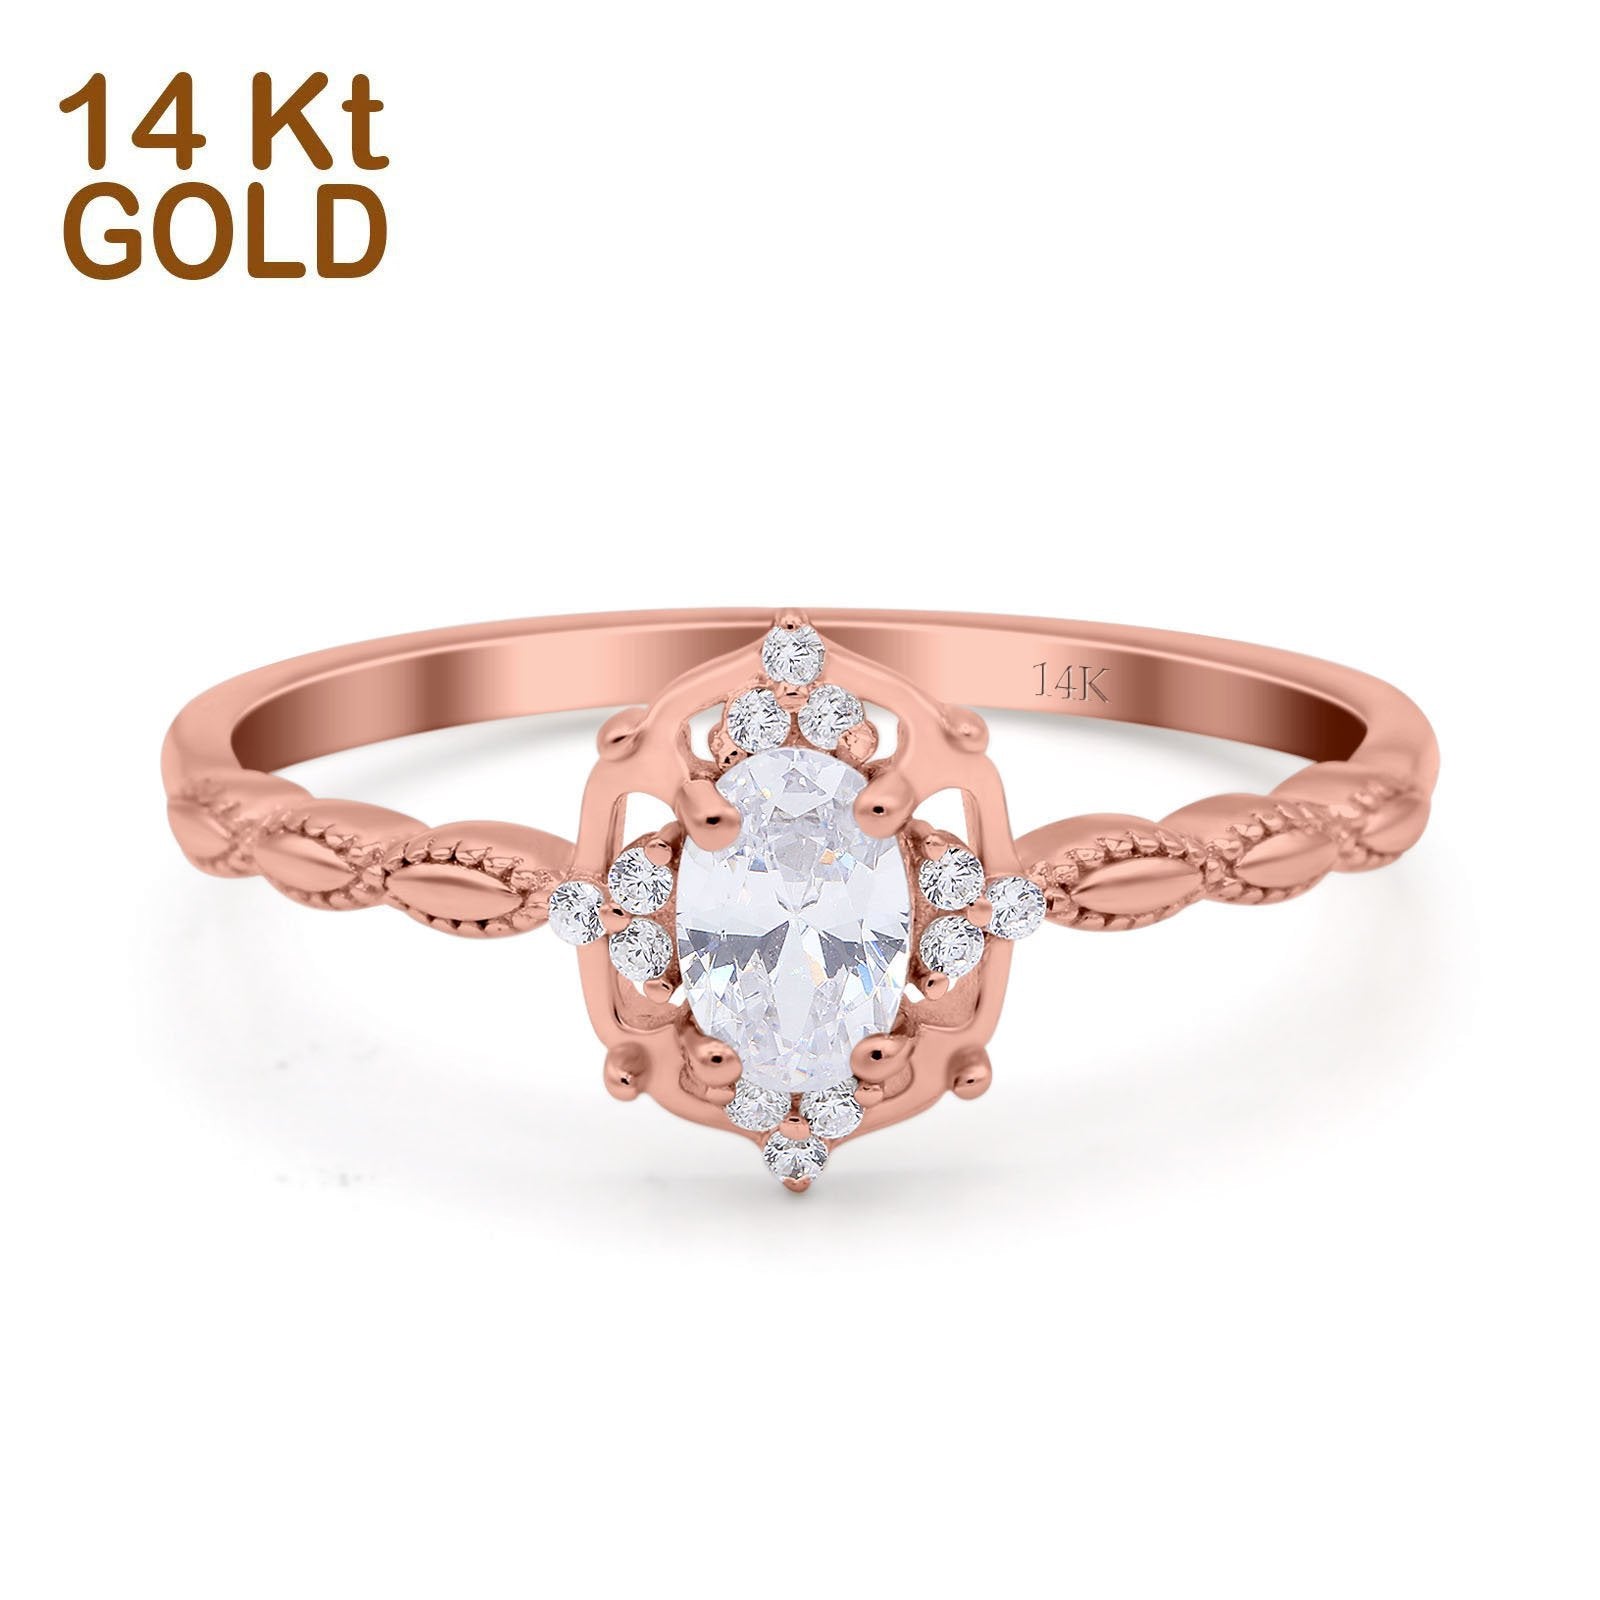 14K Gold Art Deco Petite Dainty Oval Shape Simulated Cubic Zirconia Wedding Engagement Ring